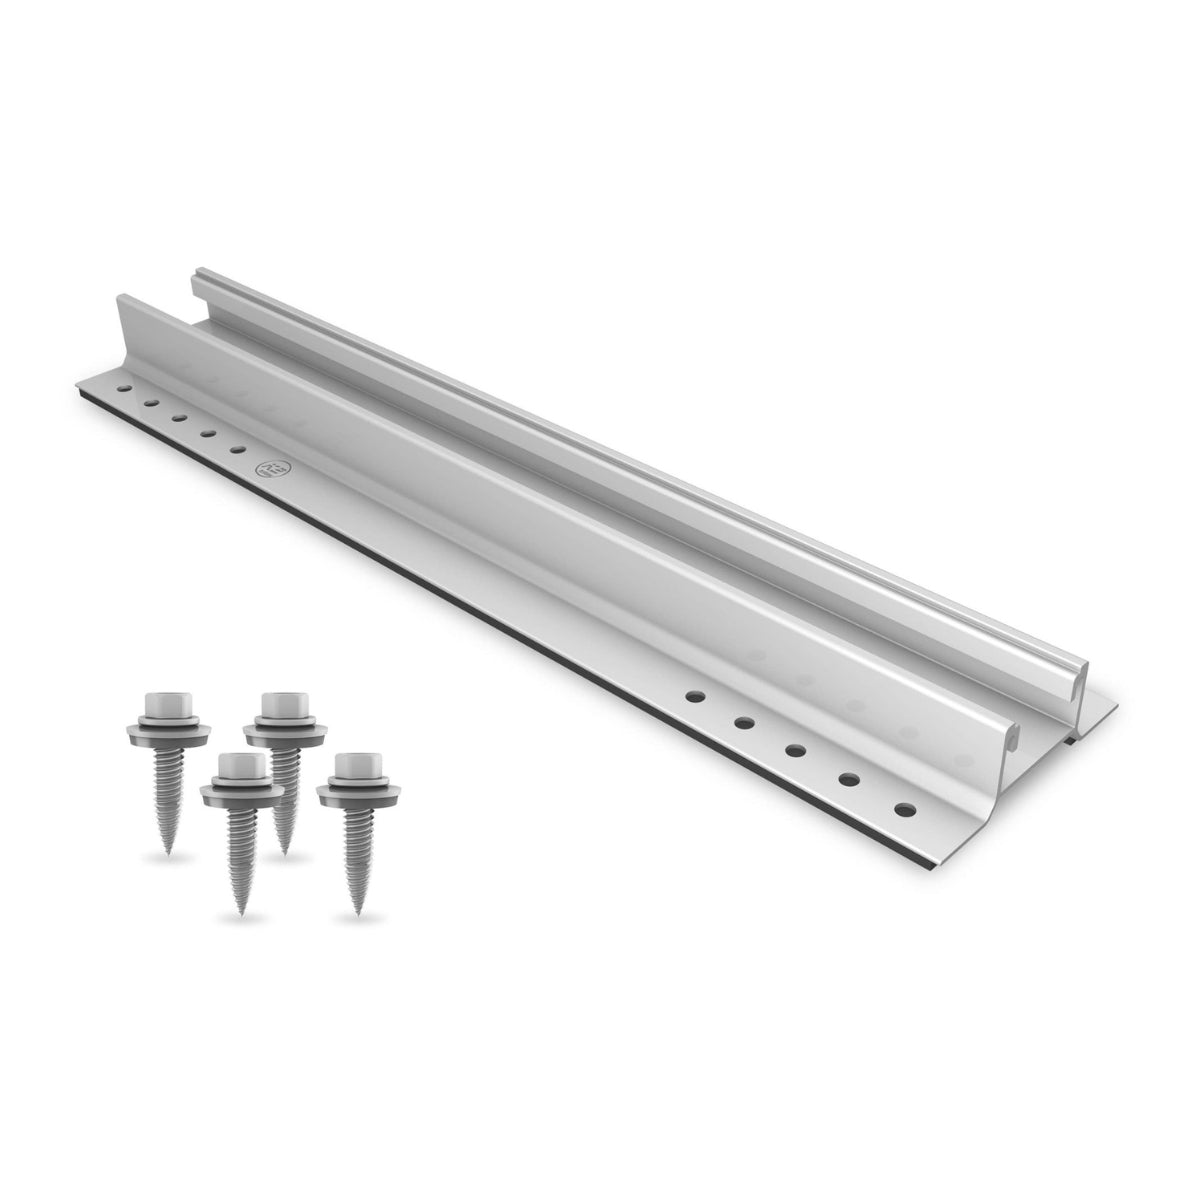 K2-Systems IBR Roof MiniRail MK2 3 Panel Roof Mounting System